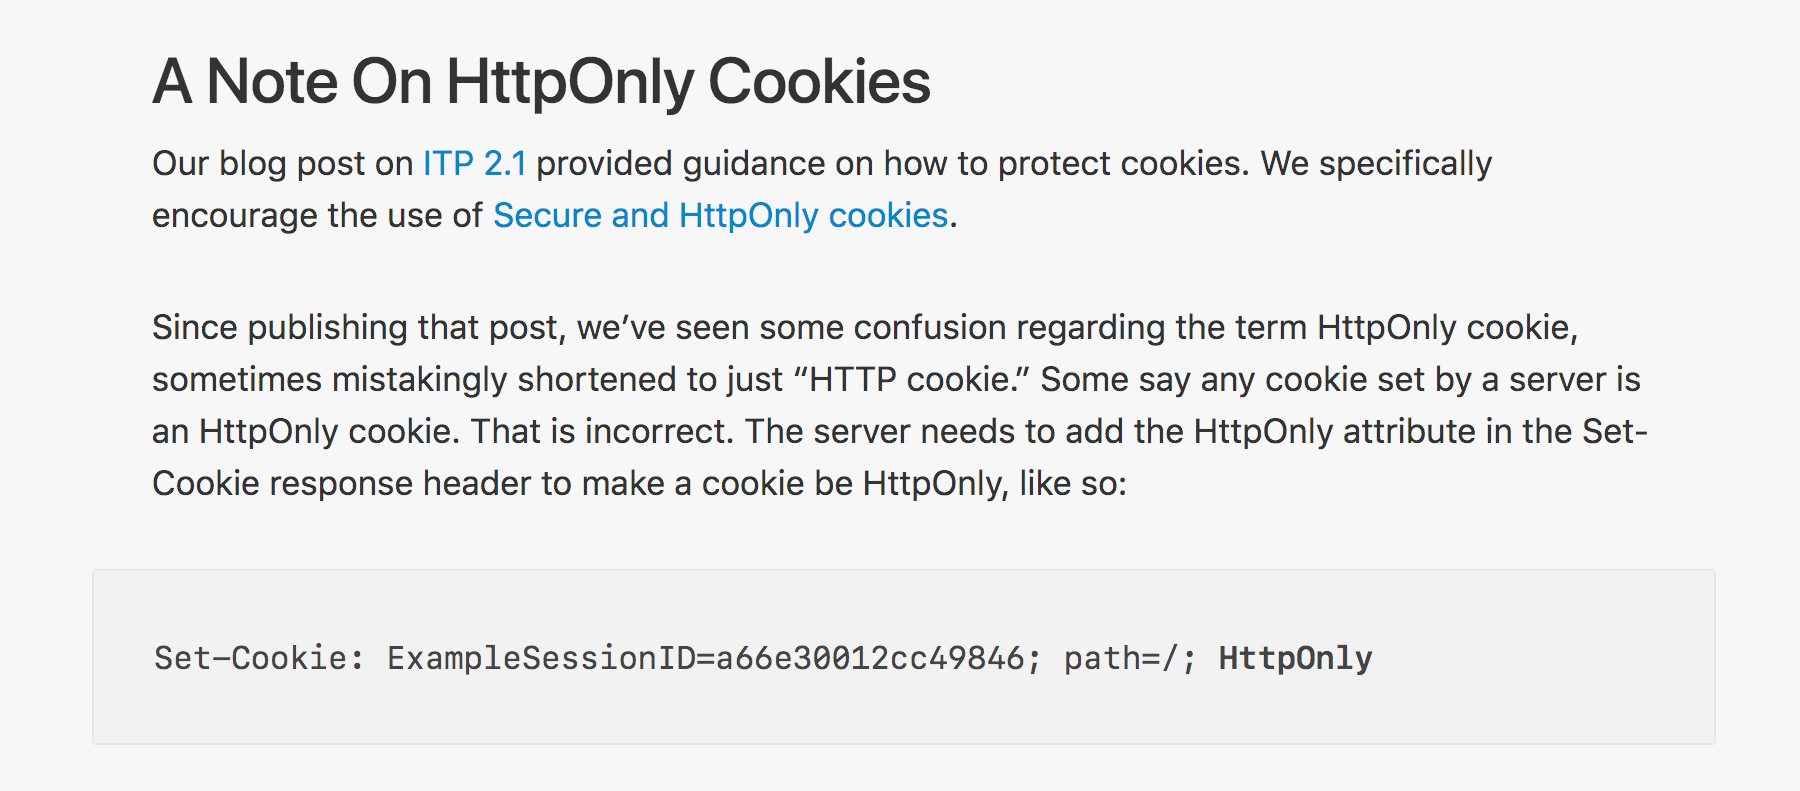 itp-2-2-a-note-on-httponly-cookies.png